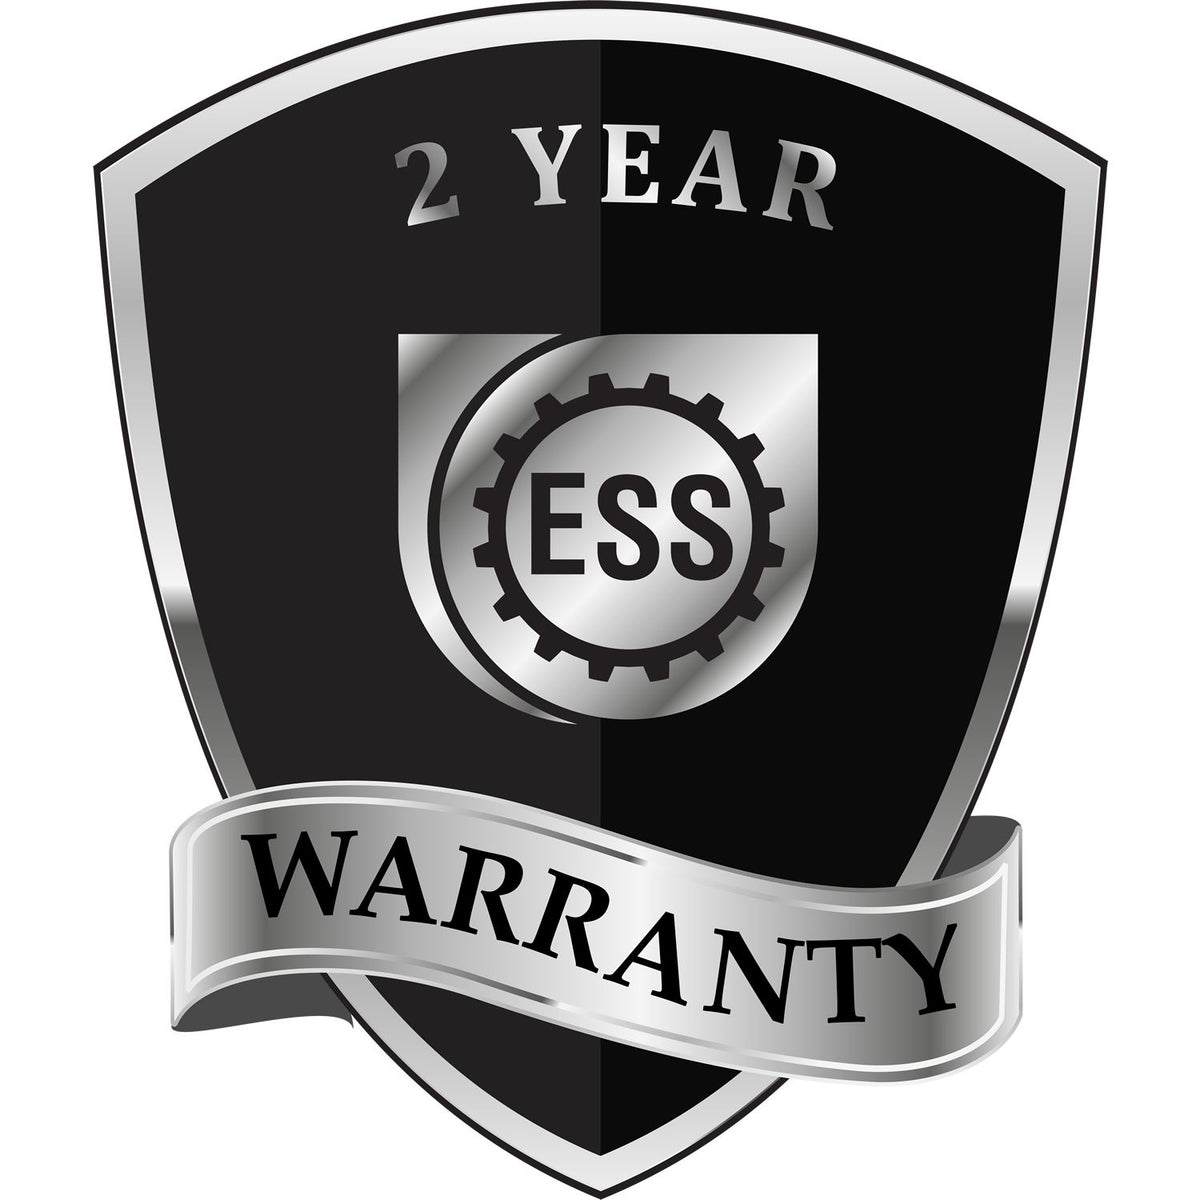 A black and silver badge or emblem showing warranty information for the Gift Maryland Architect Seal